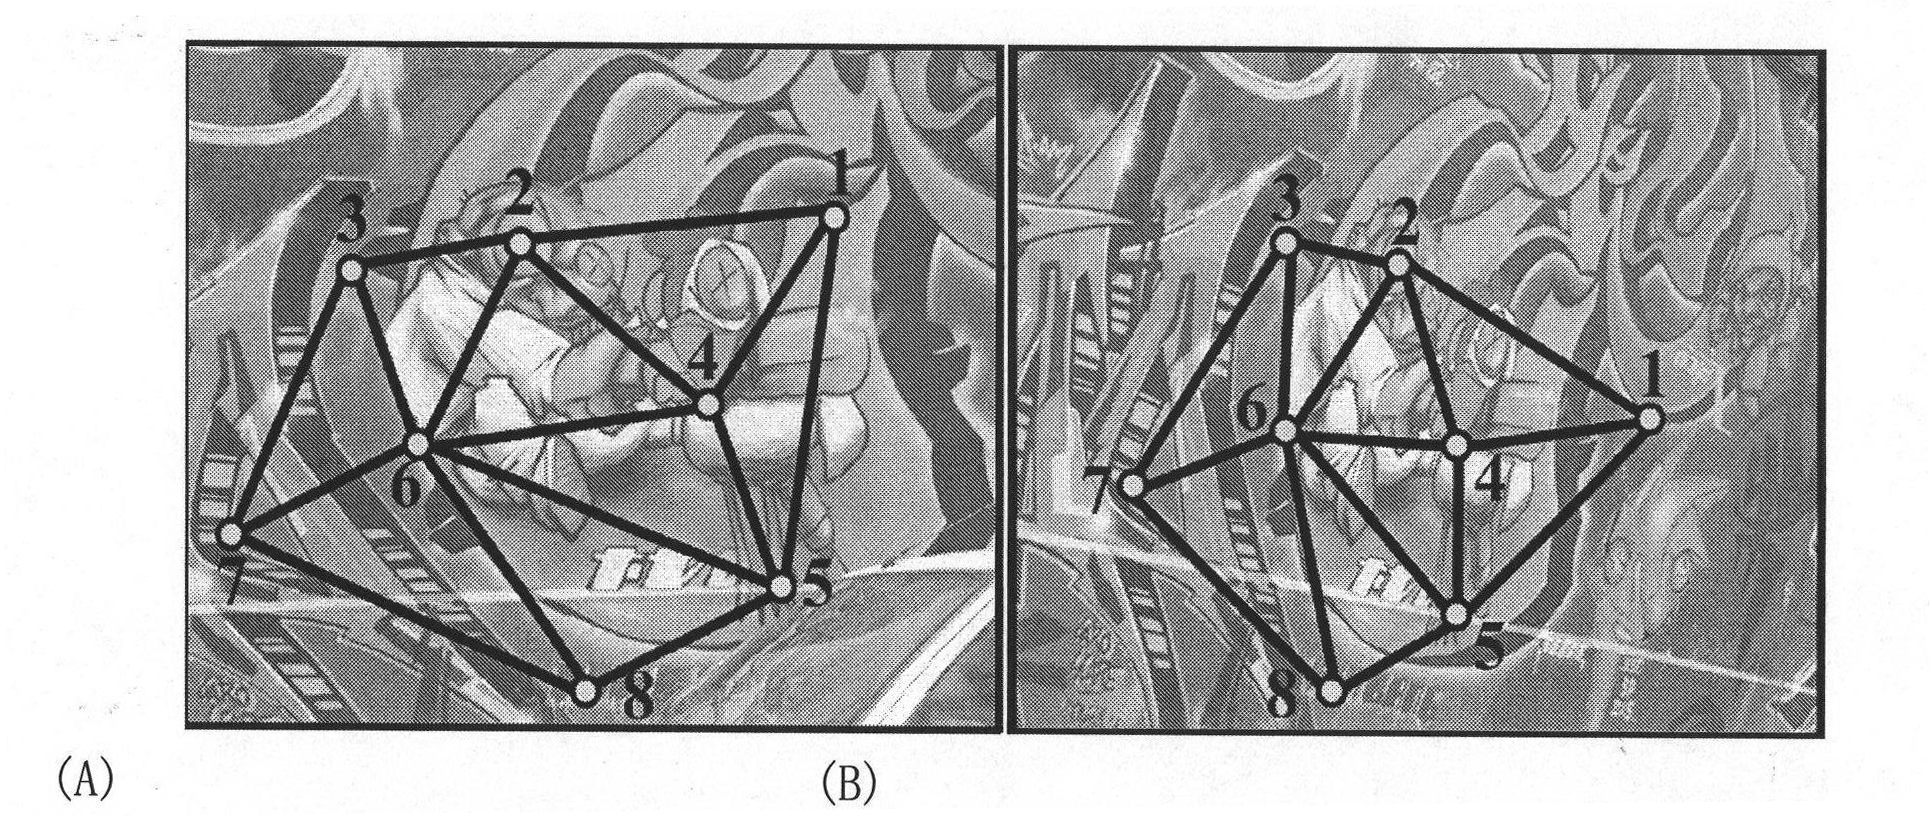 Characteristic matching method based on bilateral matching and trilateral restraining